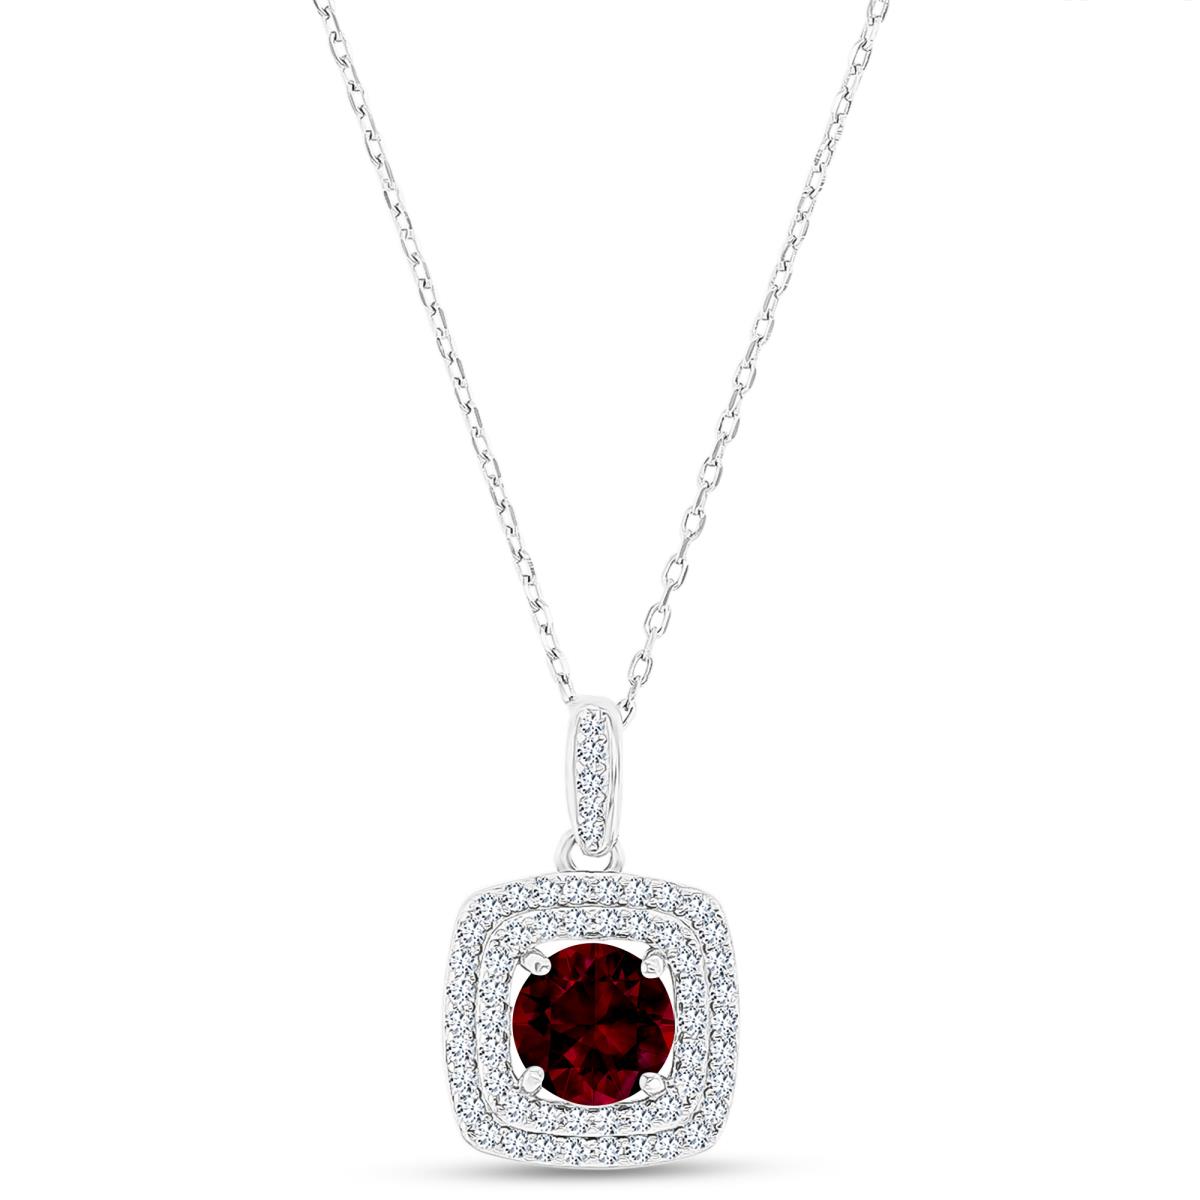 Sterling Silver Rhodium 7mm RD Garnet/ Cr White Sapphire Cushion Double Halo 16"+2" Necklace